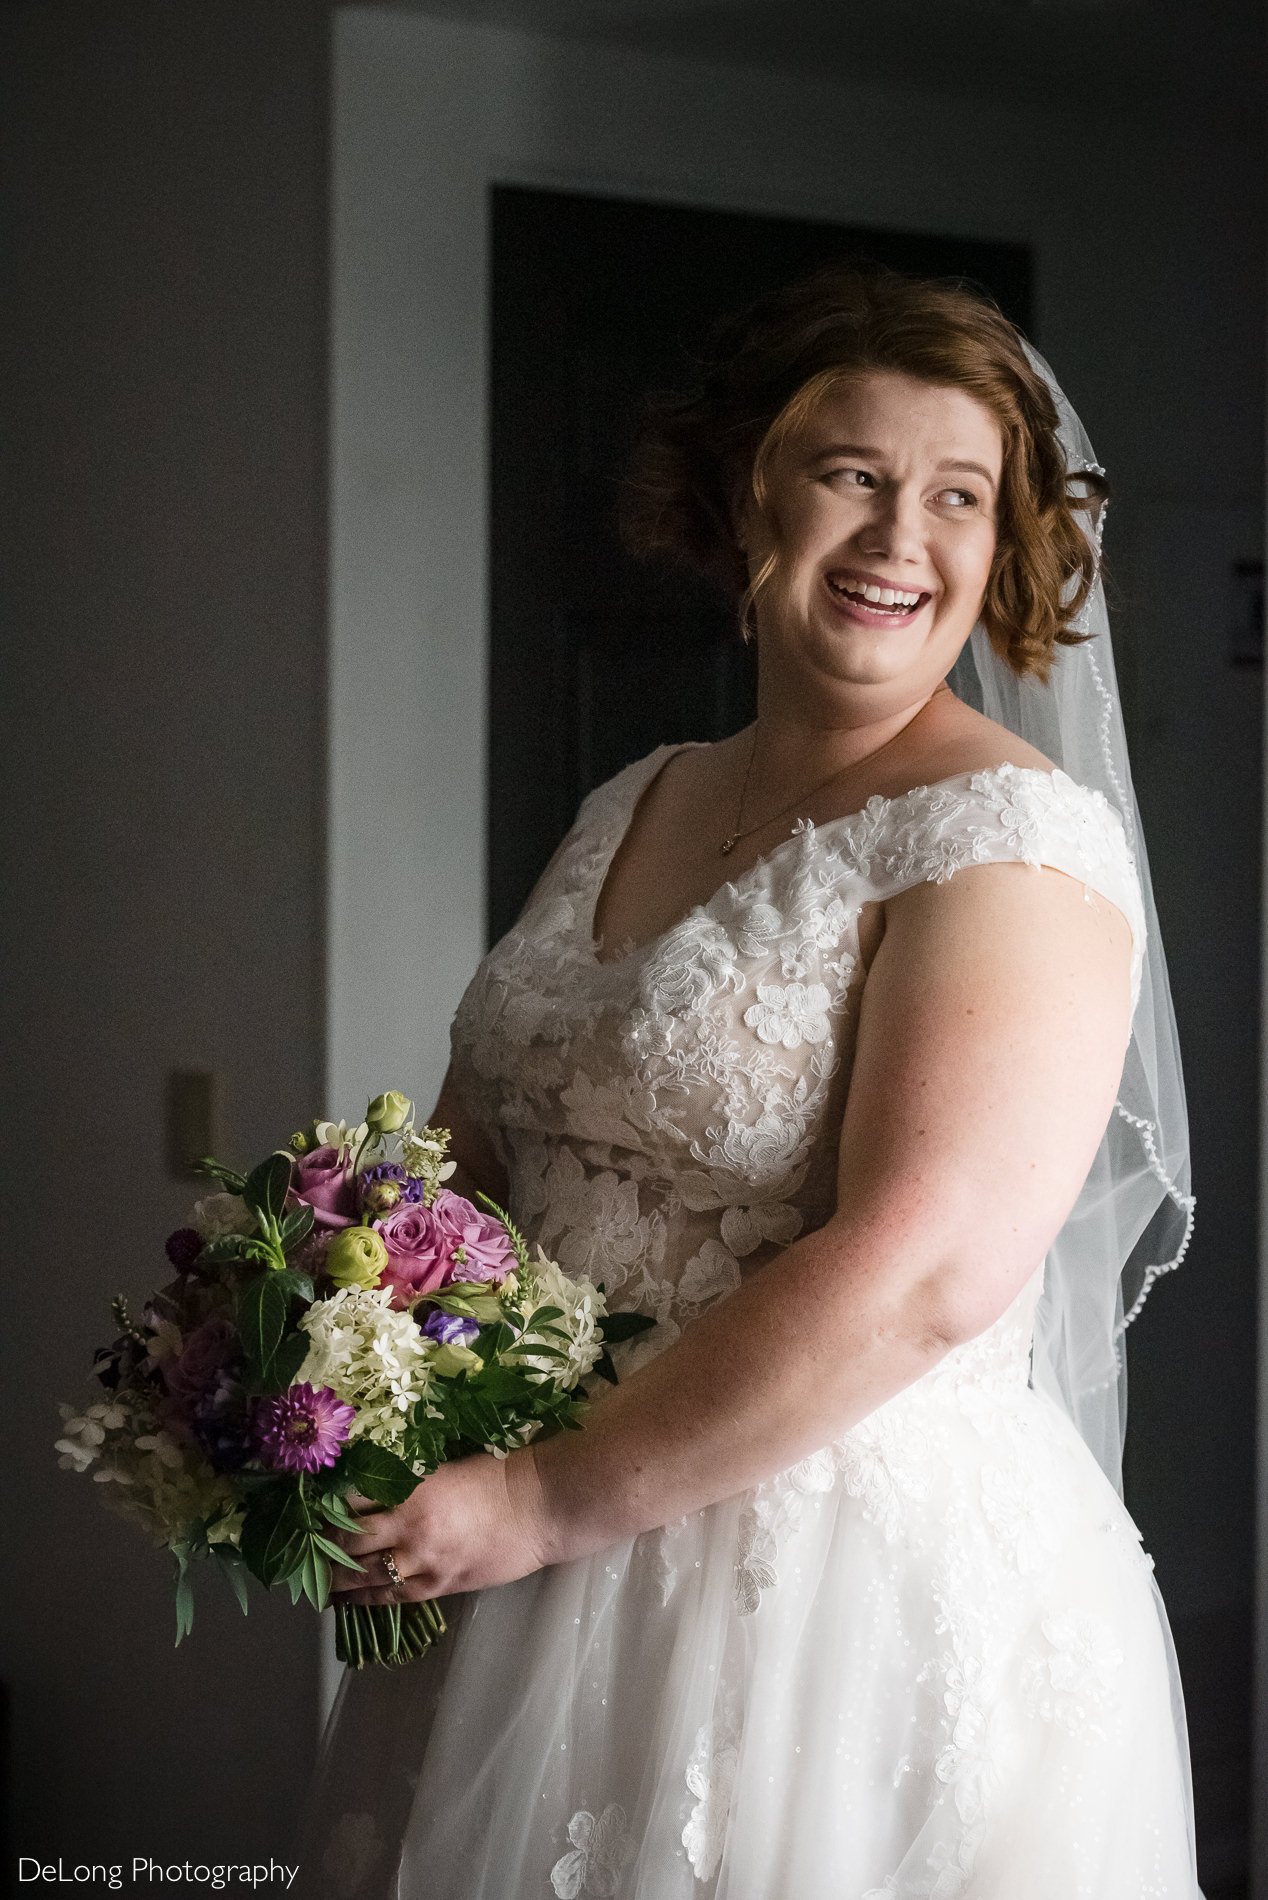 Bridal portrait near window at the Embassy Suites by Hilton Charrlotte location by Charlotte wedding photographers DeLong Photography